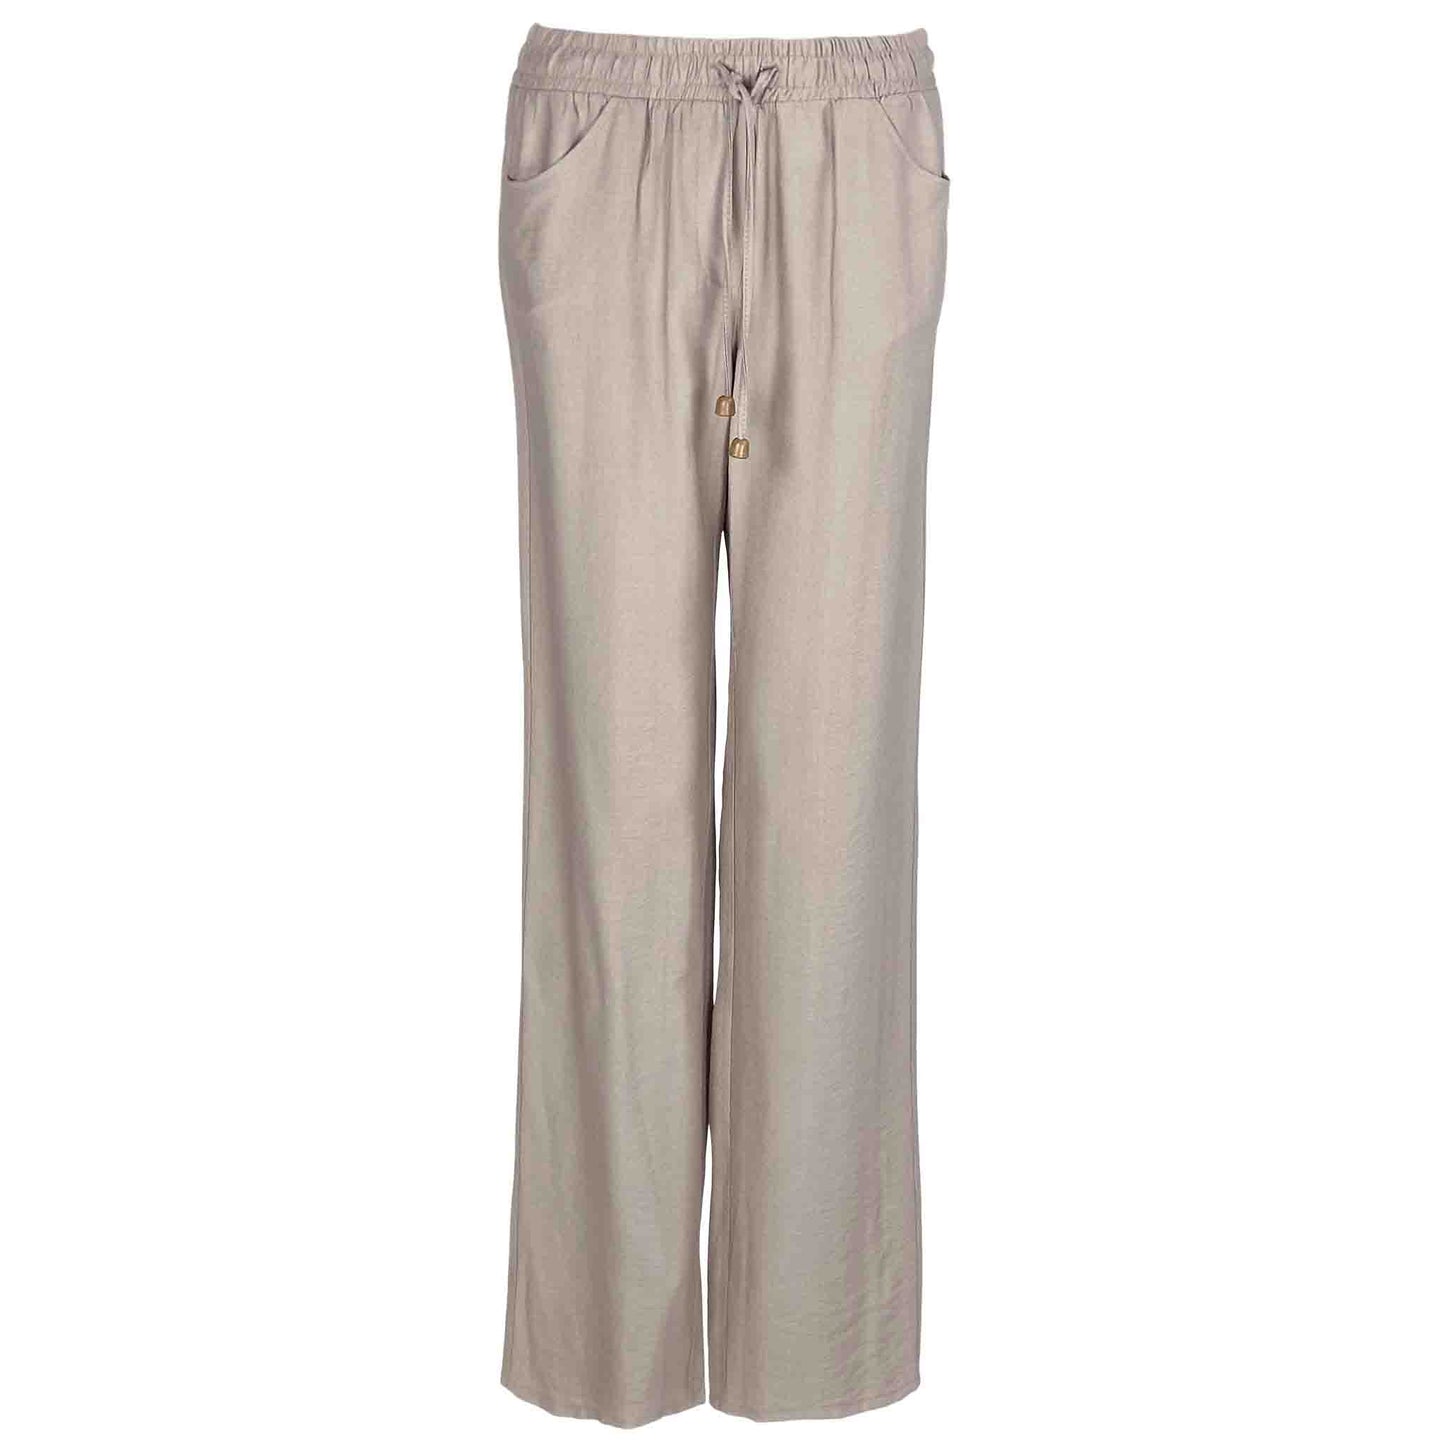 Only-M Pants Wide Tequila